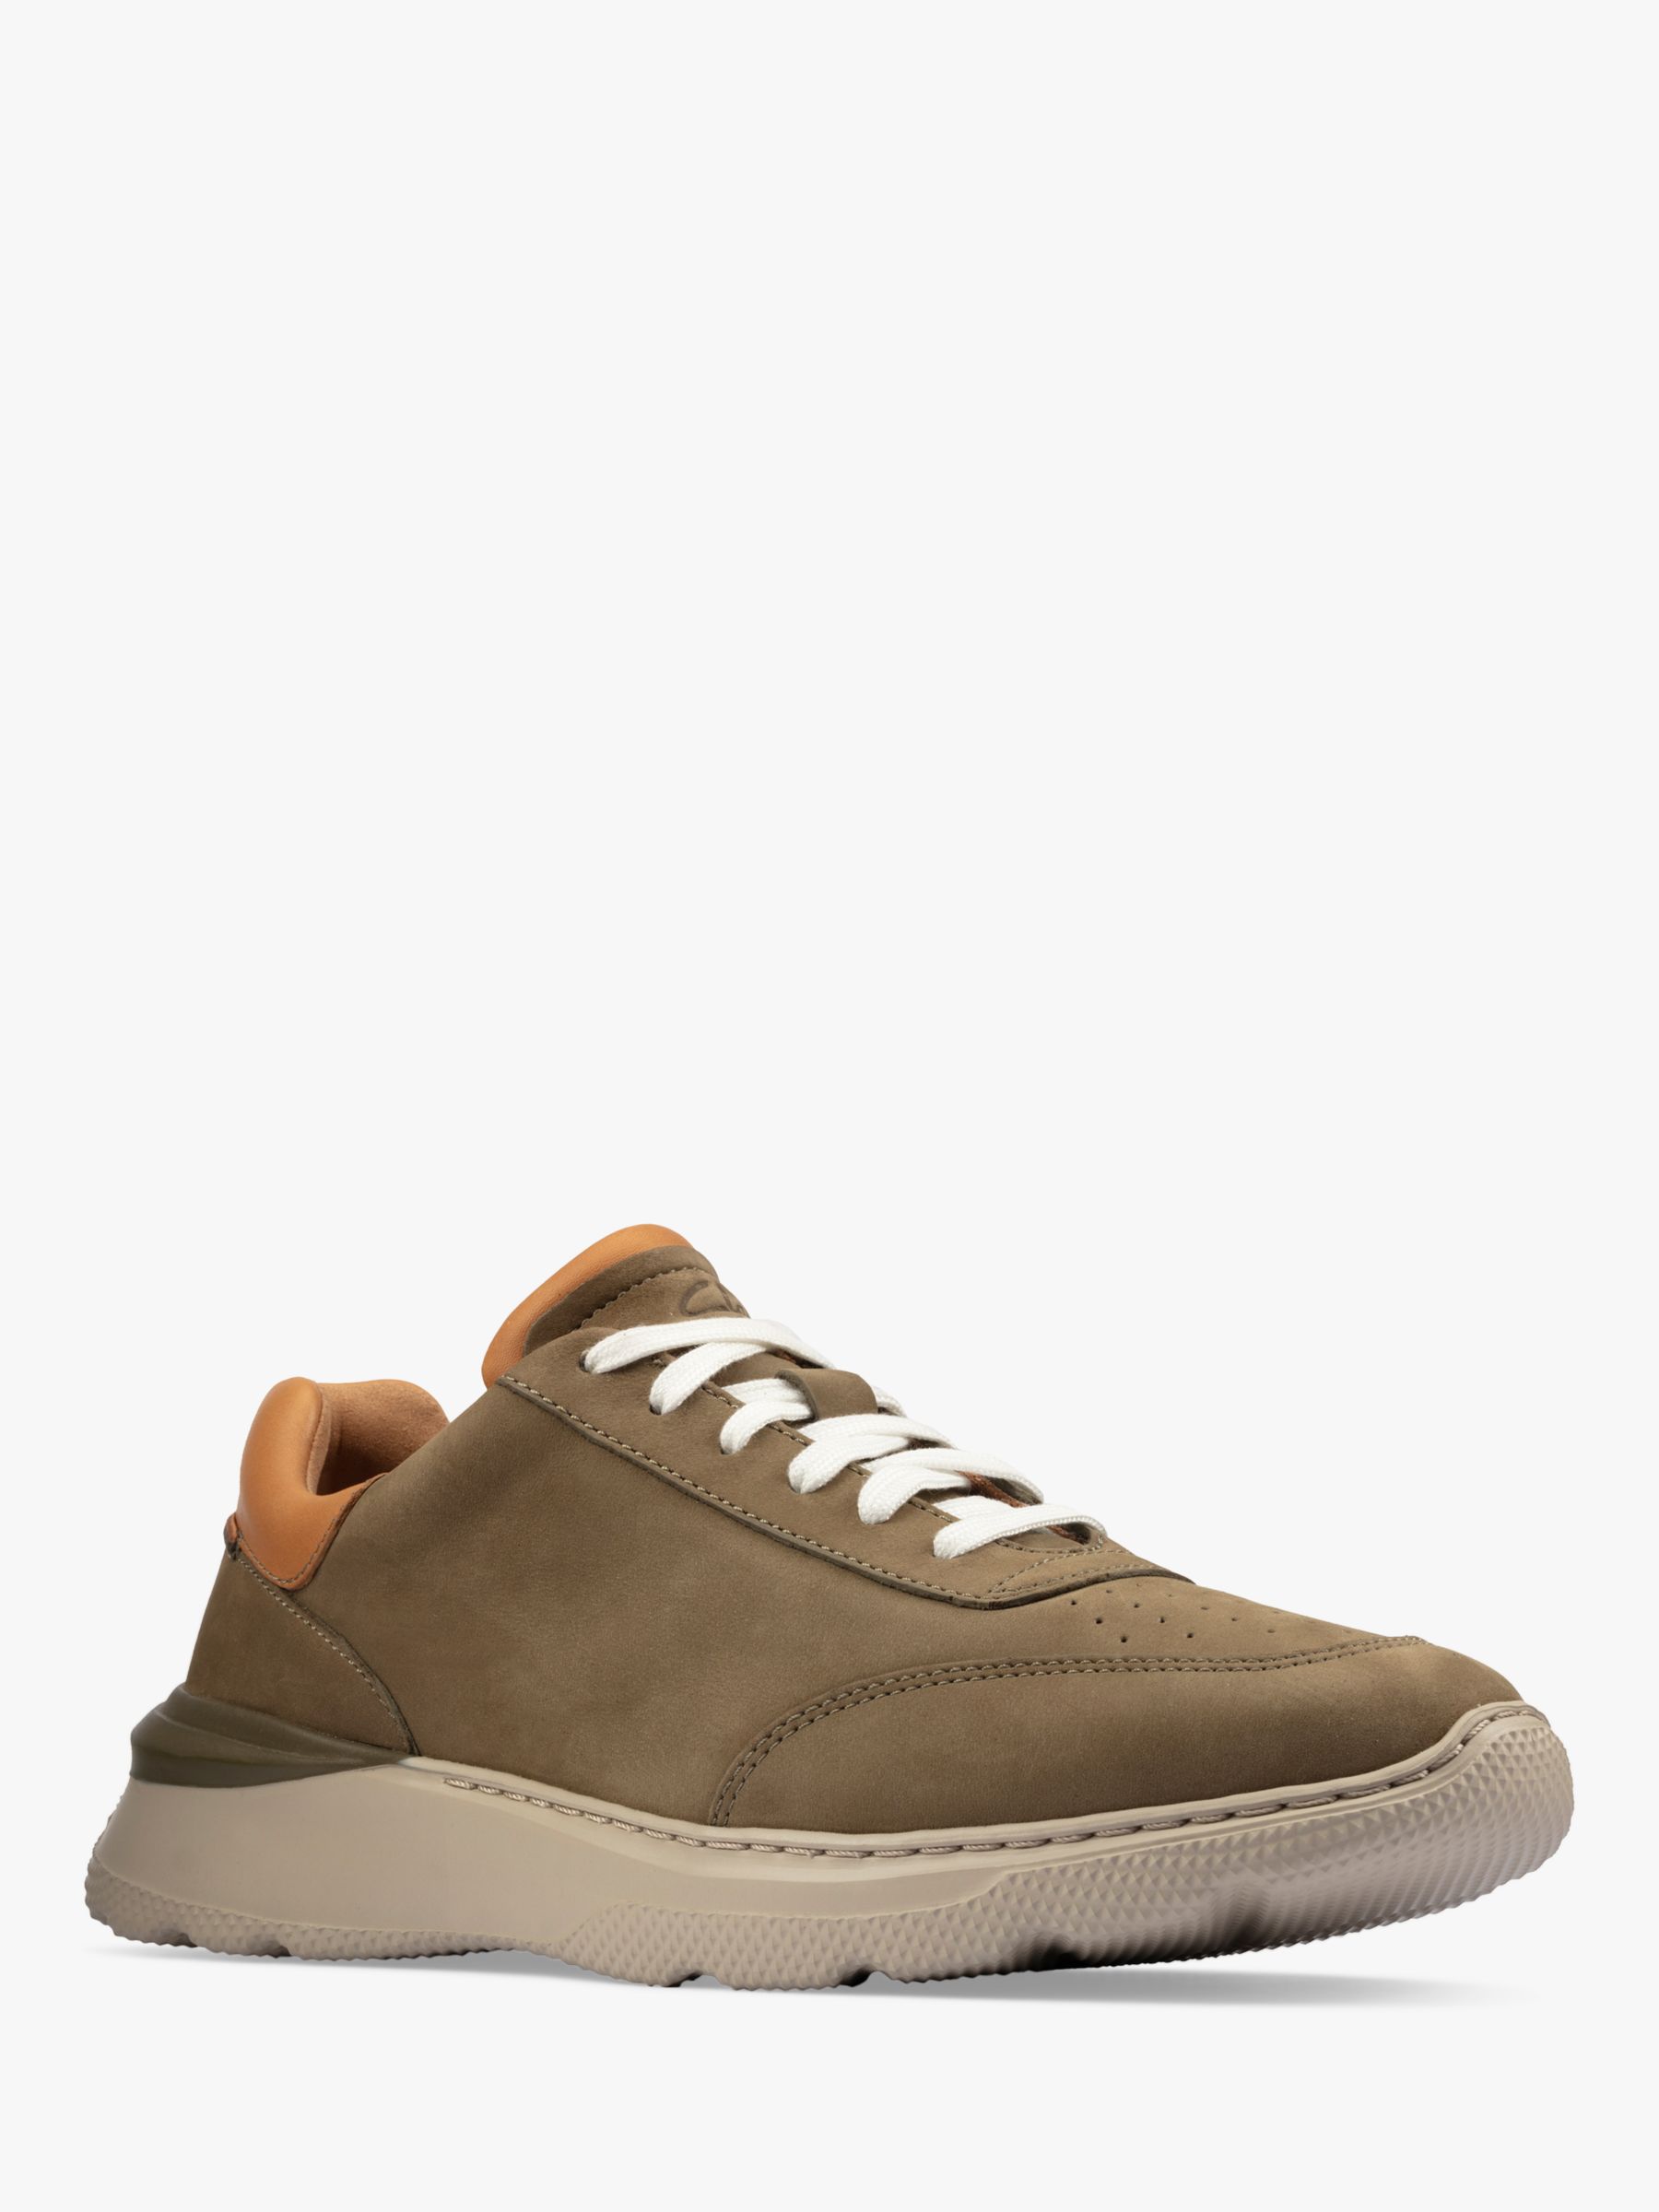 Clarks Sprint Lite Lace Up Nubuck Trainers, Olive at John Lewis & Partners